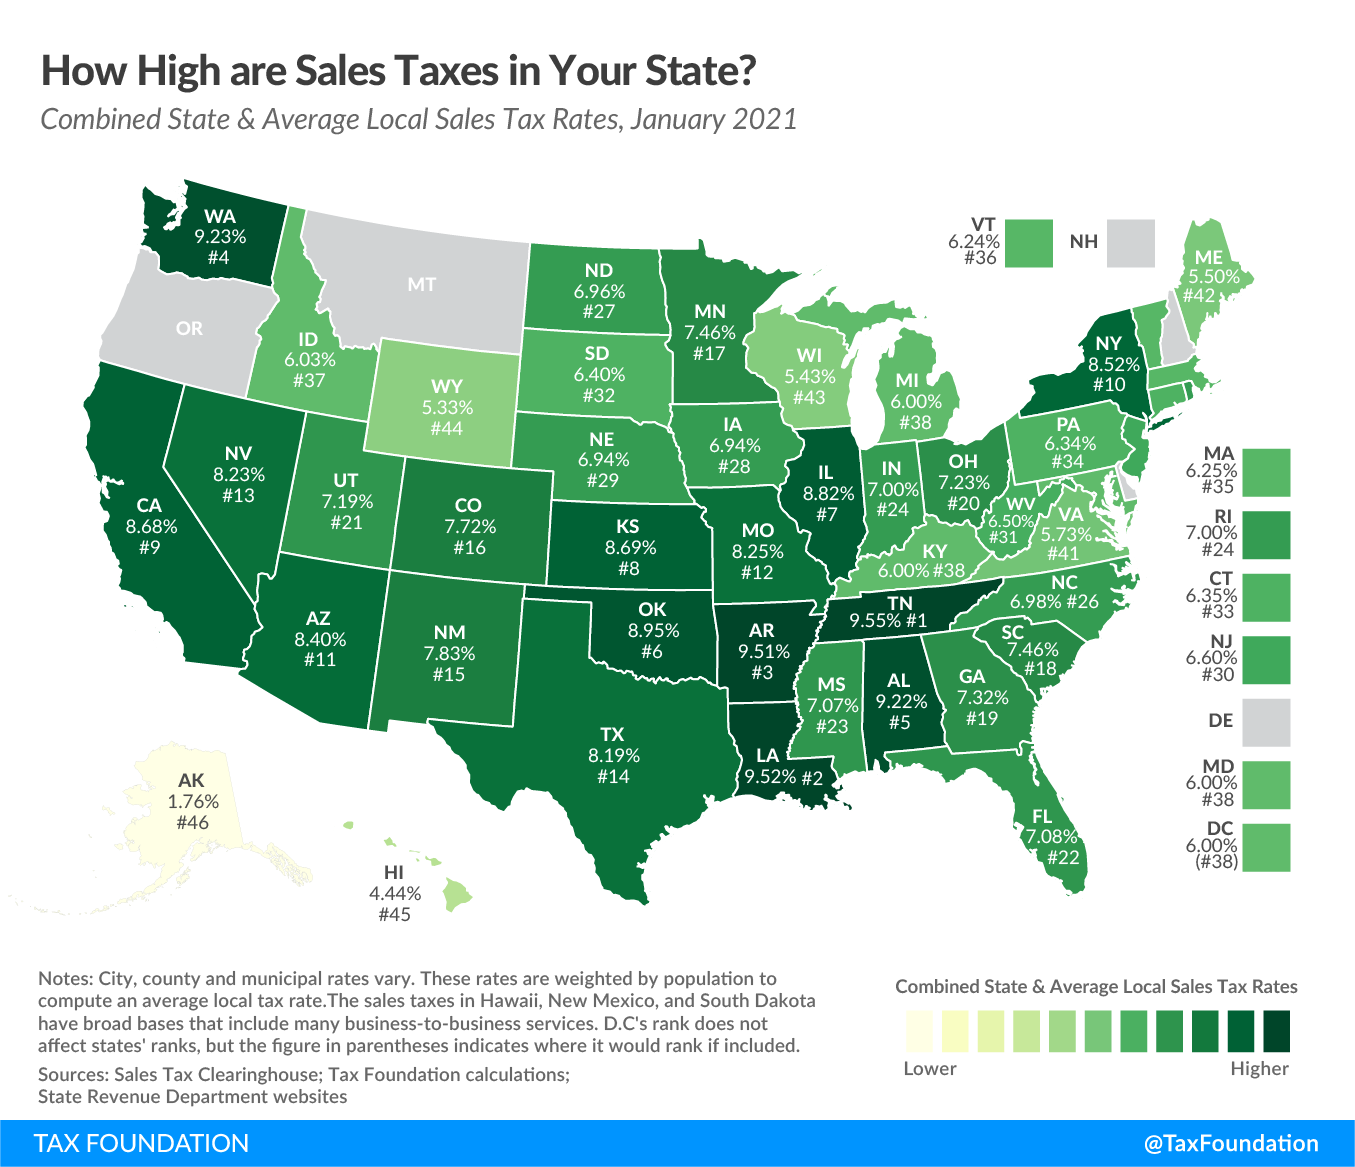 2021 sales taxes, 2021 state and local sales tax rates. 2021 state sales tax rates, 2021 sales tax rates. sales tax rates by state, sales taxes by state